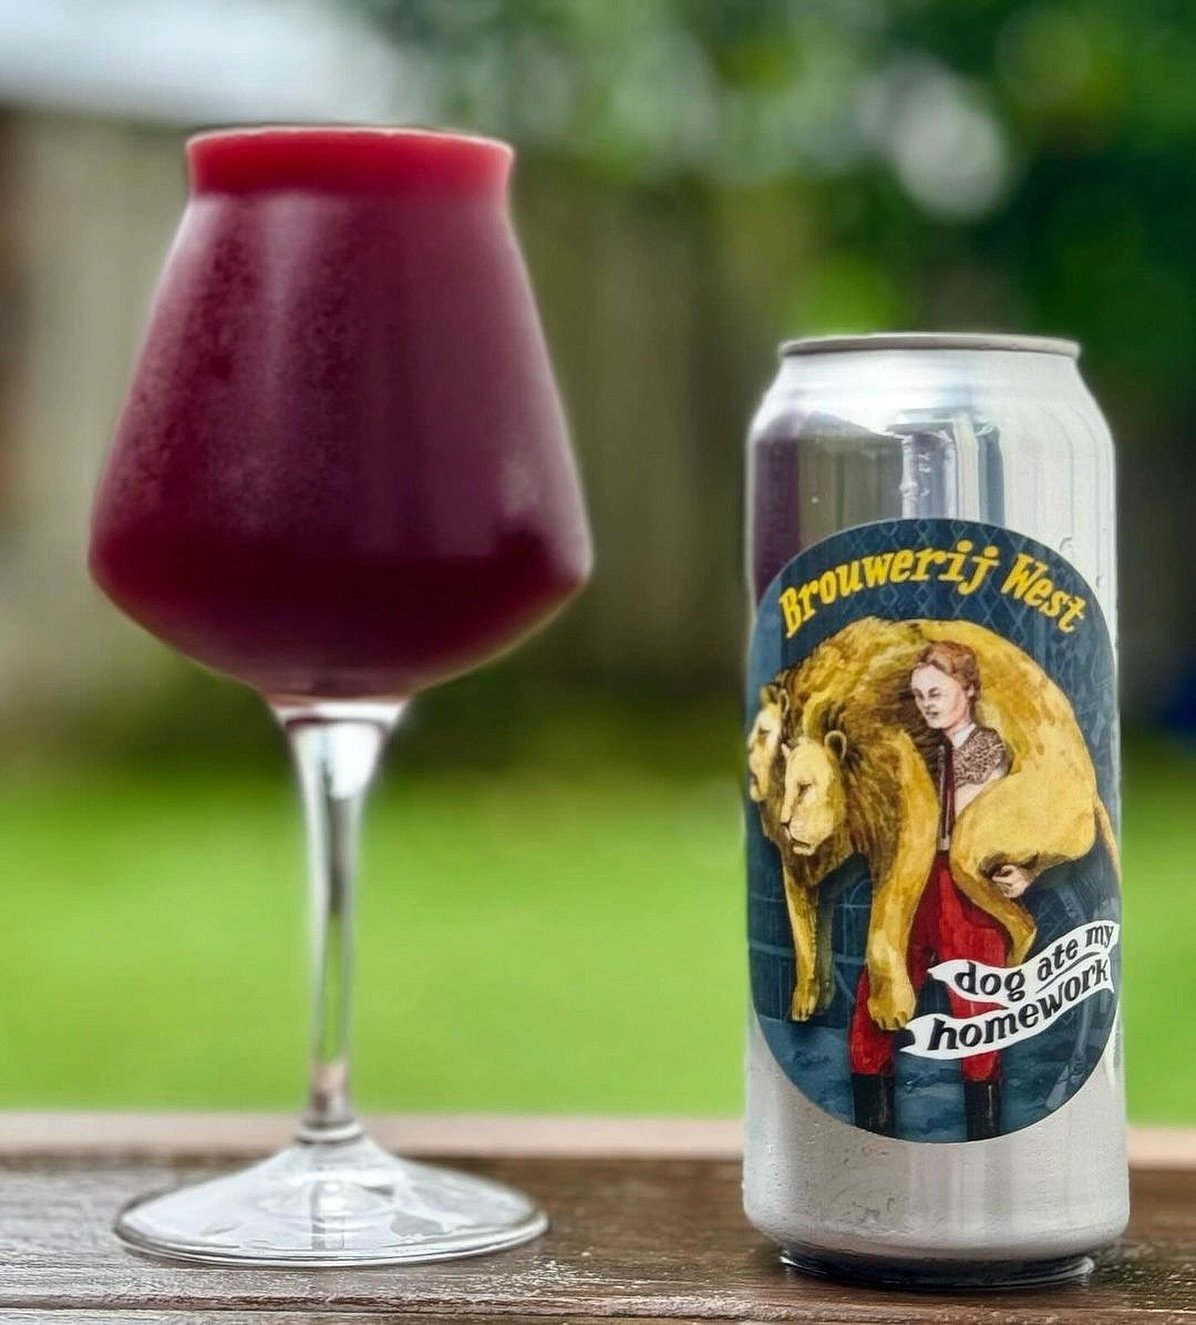 Dog Ate My Homework - Blackberry Saison (7% ABV) 🐕 A fresh, decidedly fruit-forward saison, brewed with blackberries and black currants. This beer is deep red in color, but rather than being sweet like many fruit beers, it is dry, tart, and refreshi